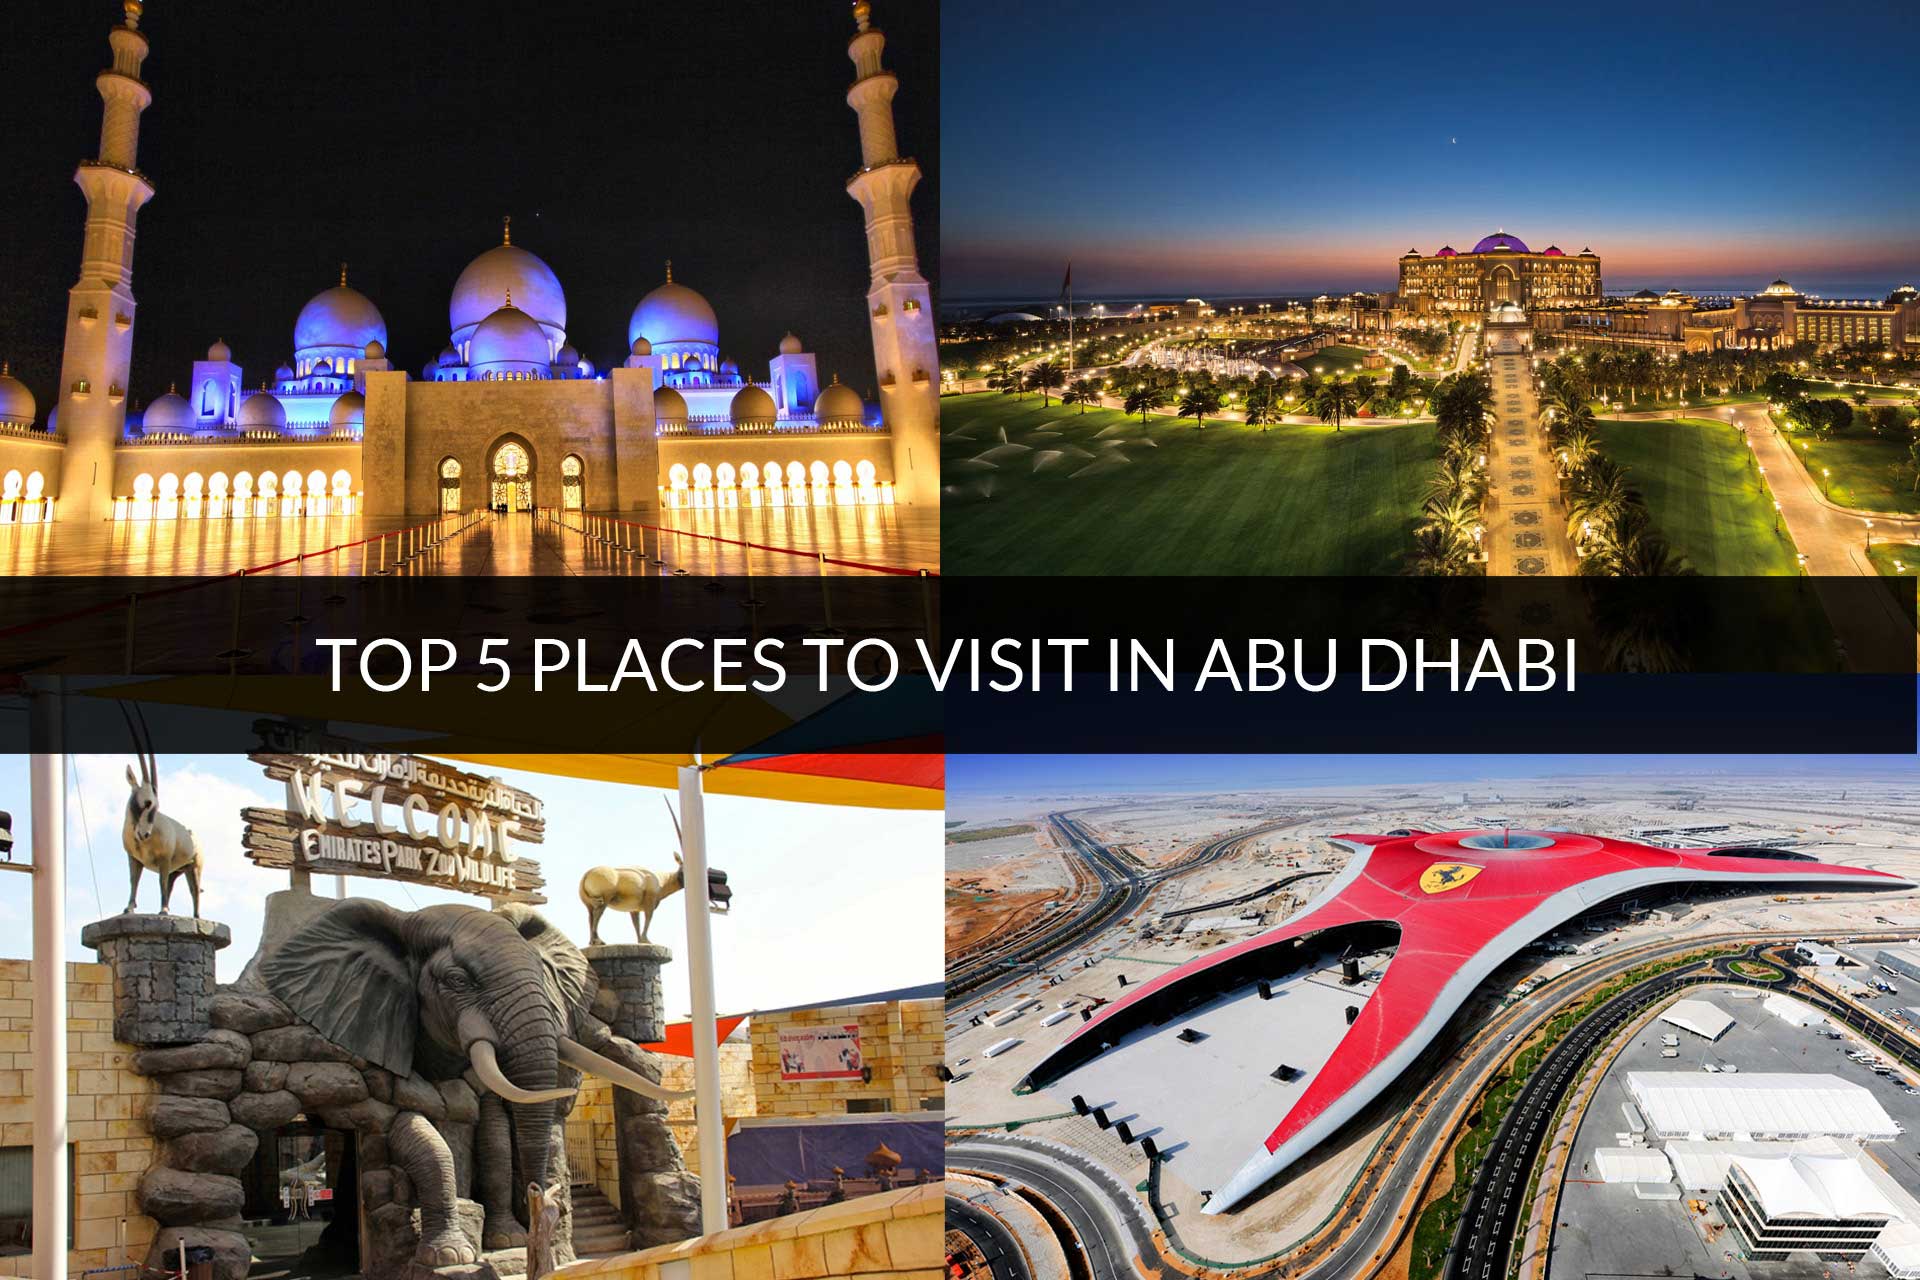 Top 5 Places to Visit in Abu Dhabi